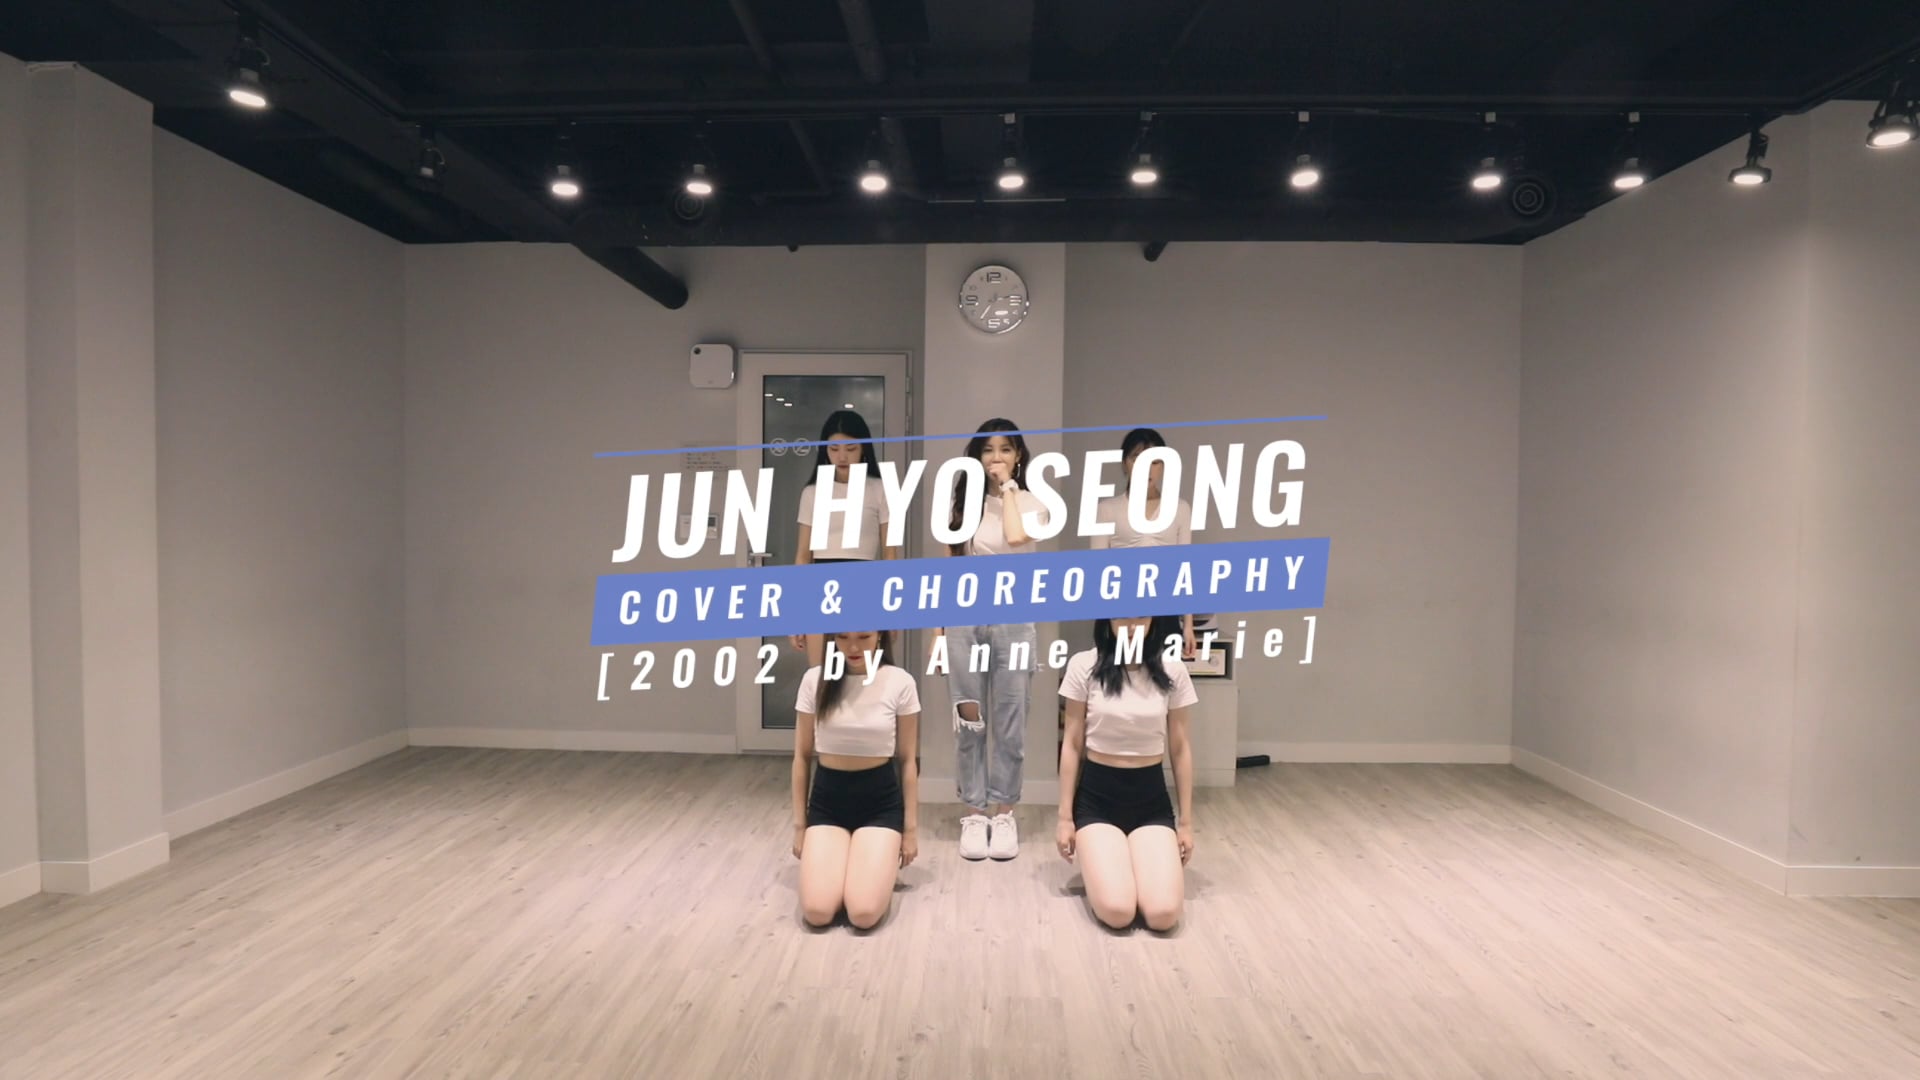 JUN HYO SEONG COVER & CHOREOGRAPHY - 2002 by Anne Marie [Trephic]